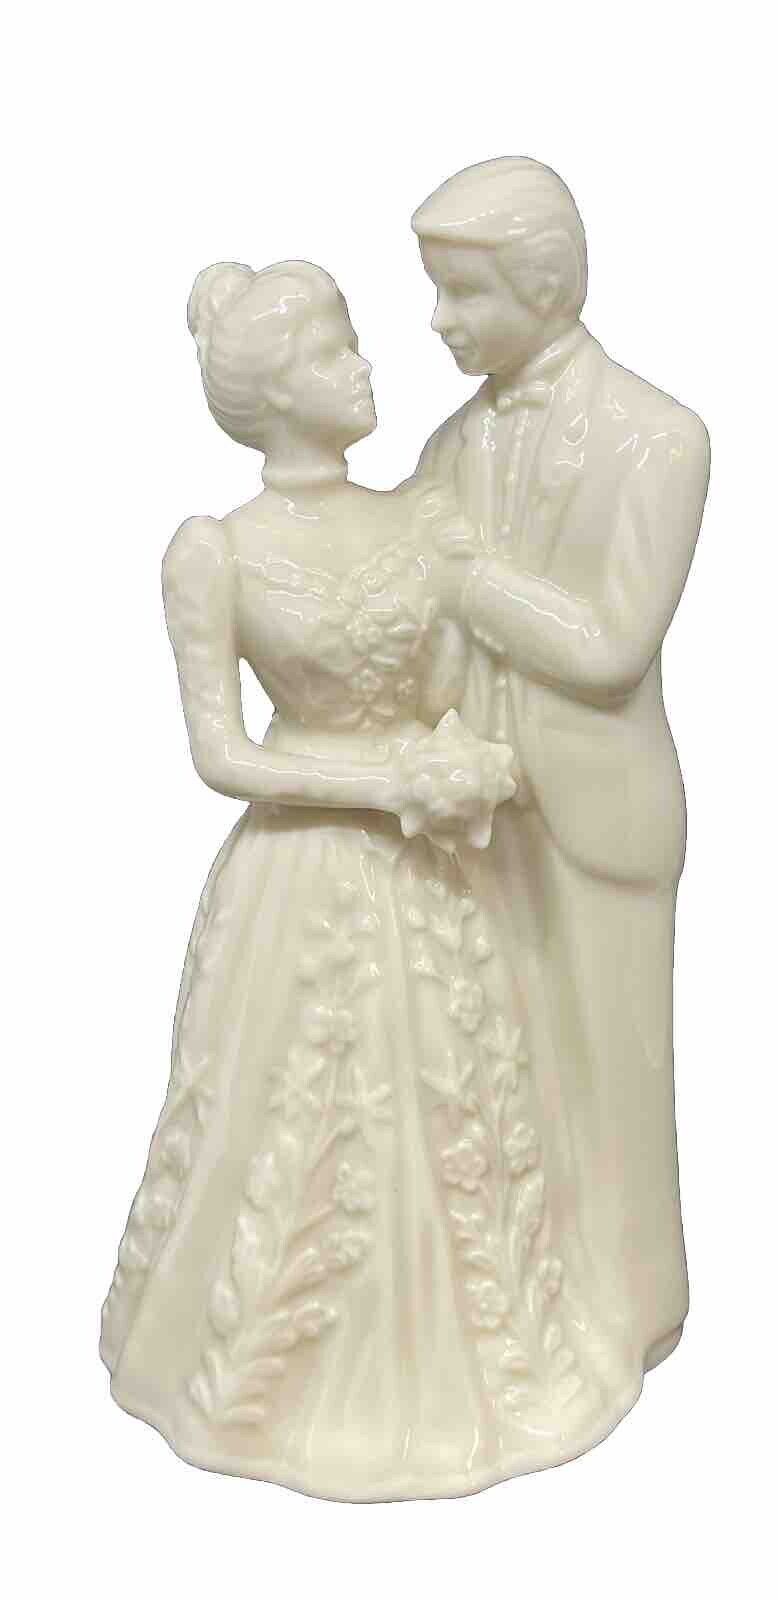 LENOX WEDDING PROMISES COLLECTION BRIDE AND GROOM FIGURINE CAKE TOPPER